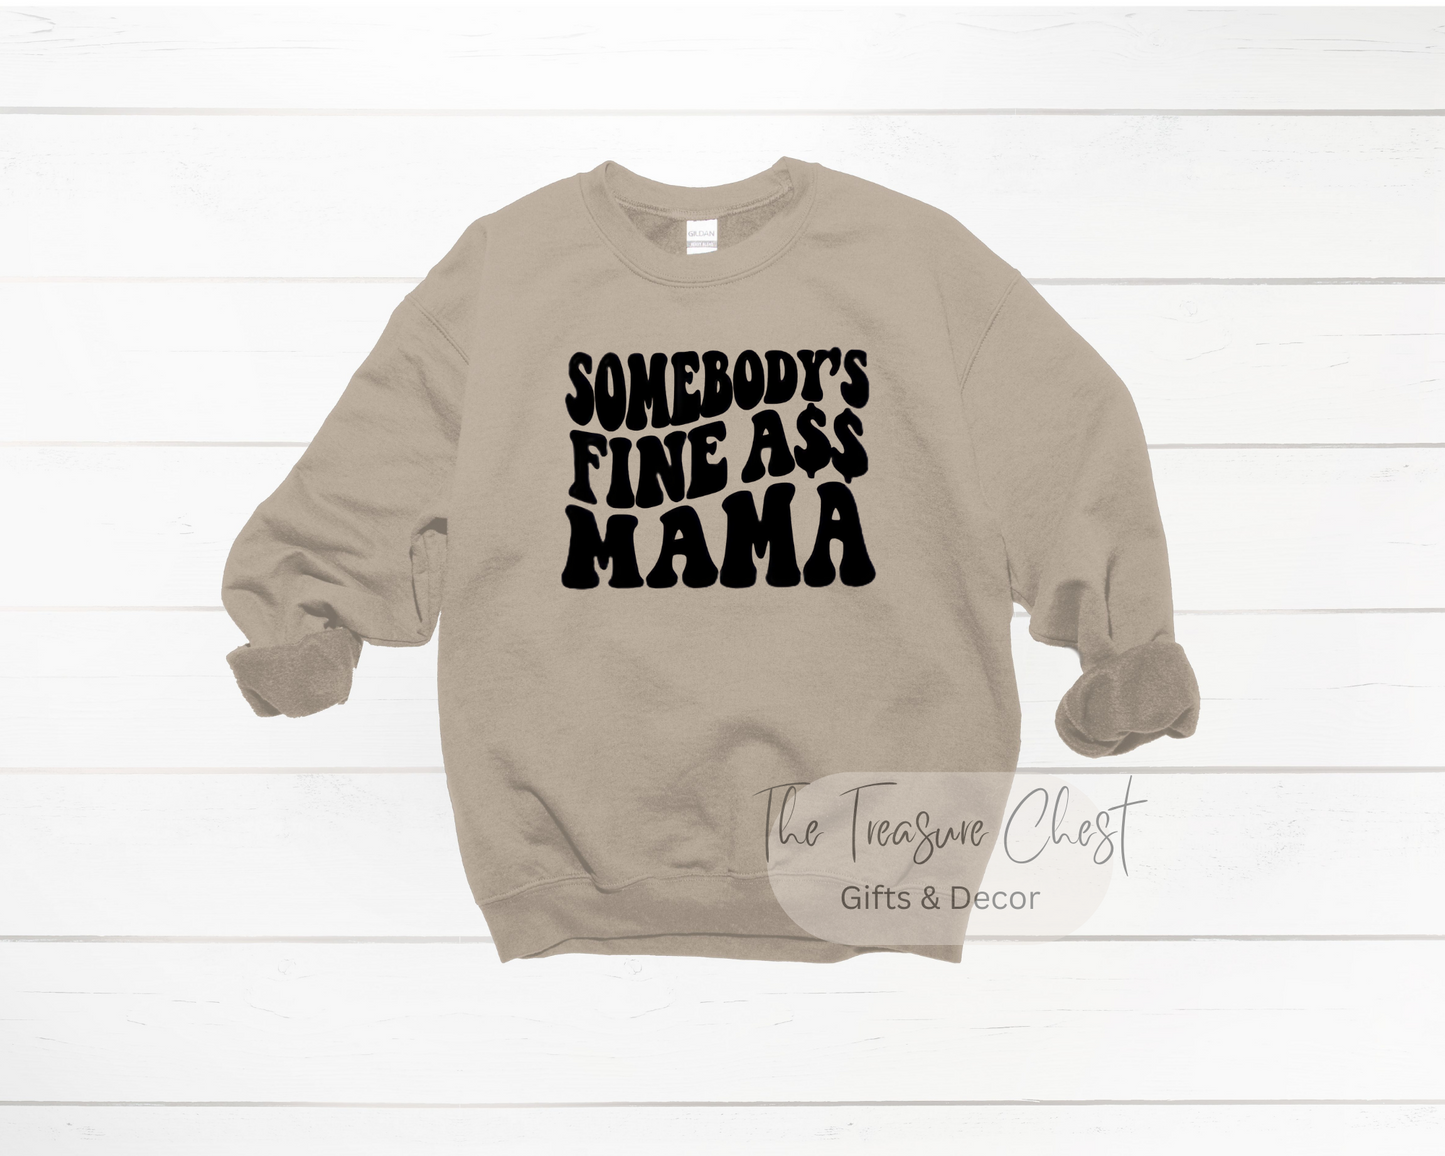 Make a statement with this hilarious Somebody's Fine Ass Mama Crewneck Sweatshirt! Show off your sense of humour in the most stylish way possible with this classic crewneck. This soft, comfortable, and lightweight fabric is perfect for all-day wear, making it a must-have for any wardrobe. Sand in colour